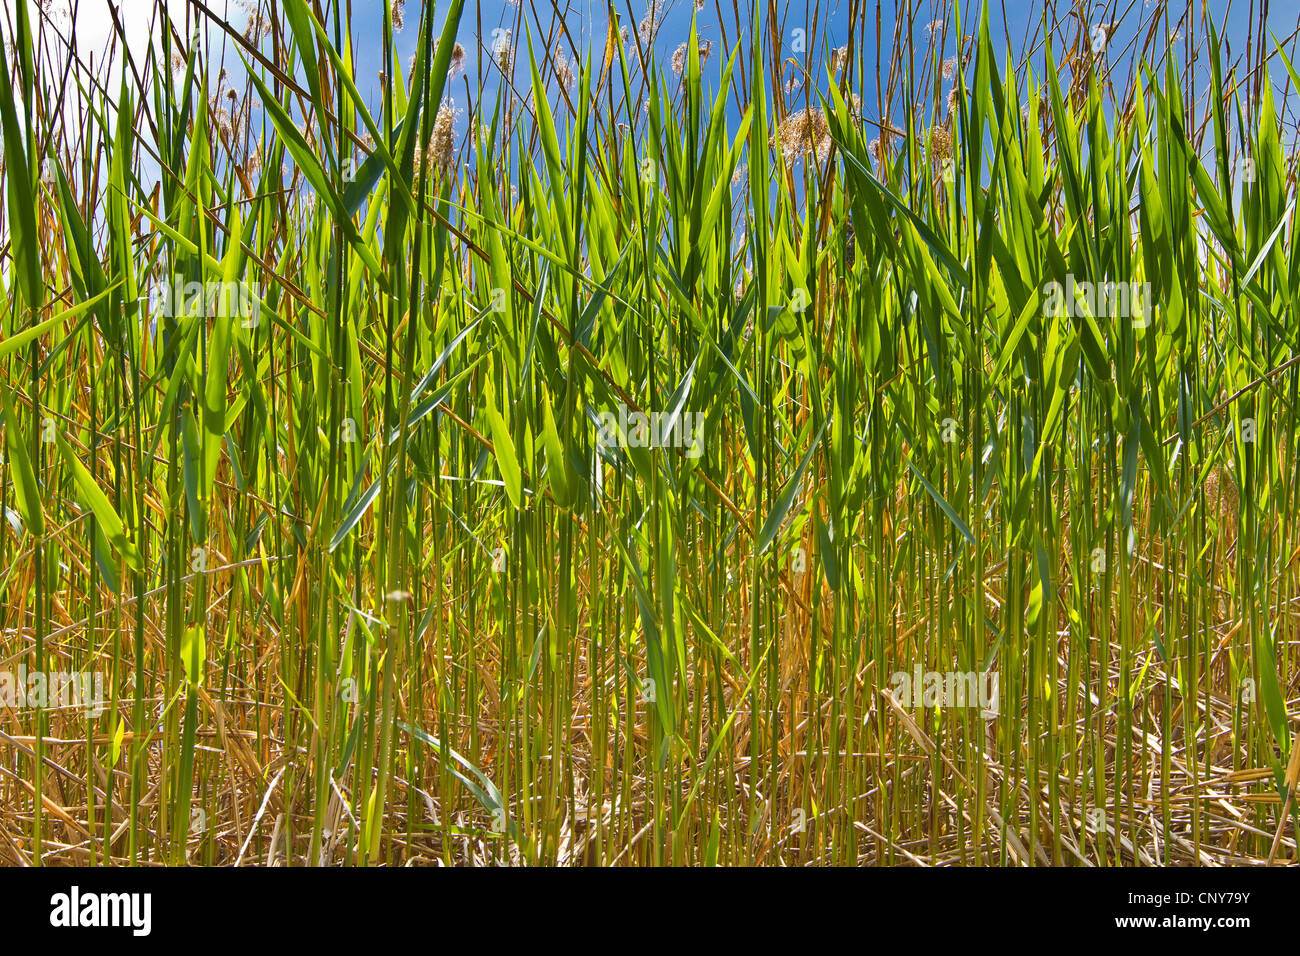 reed grass, common reed (Phragmites communis, Phragmites australis), sprouts in backlight, Germany, Bavaria, Staffelsee Stock Photo